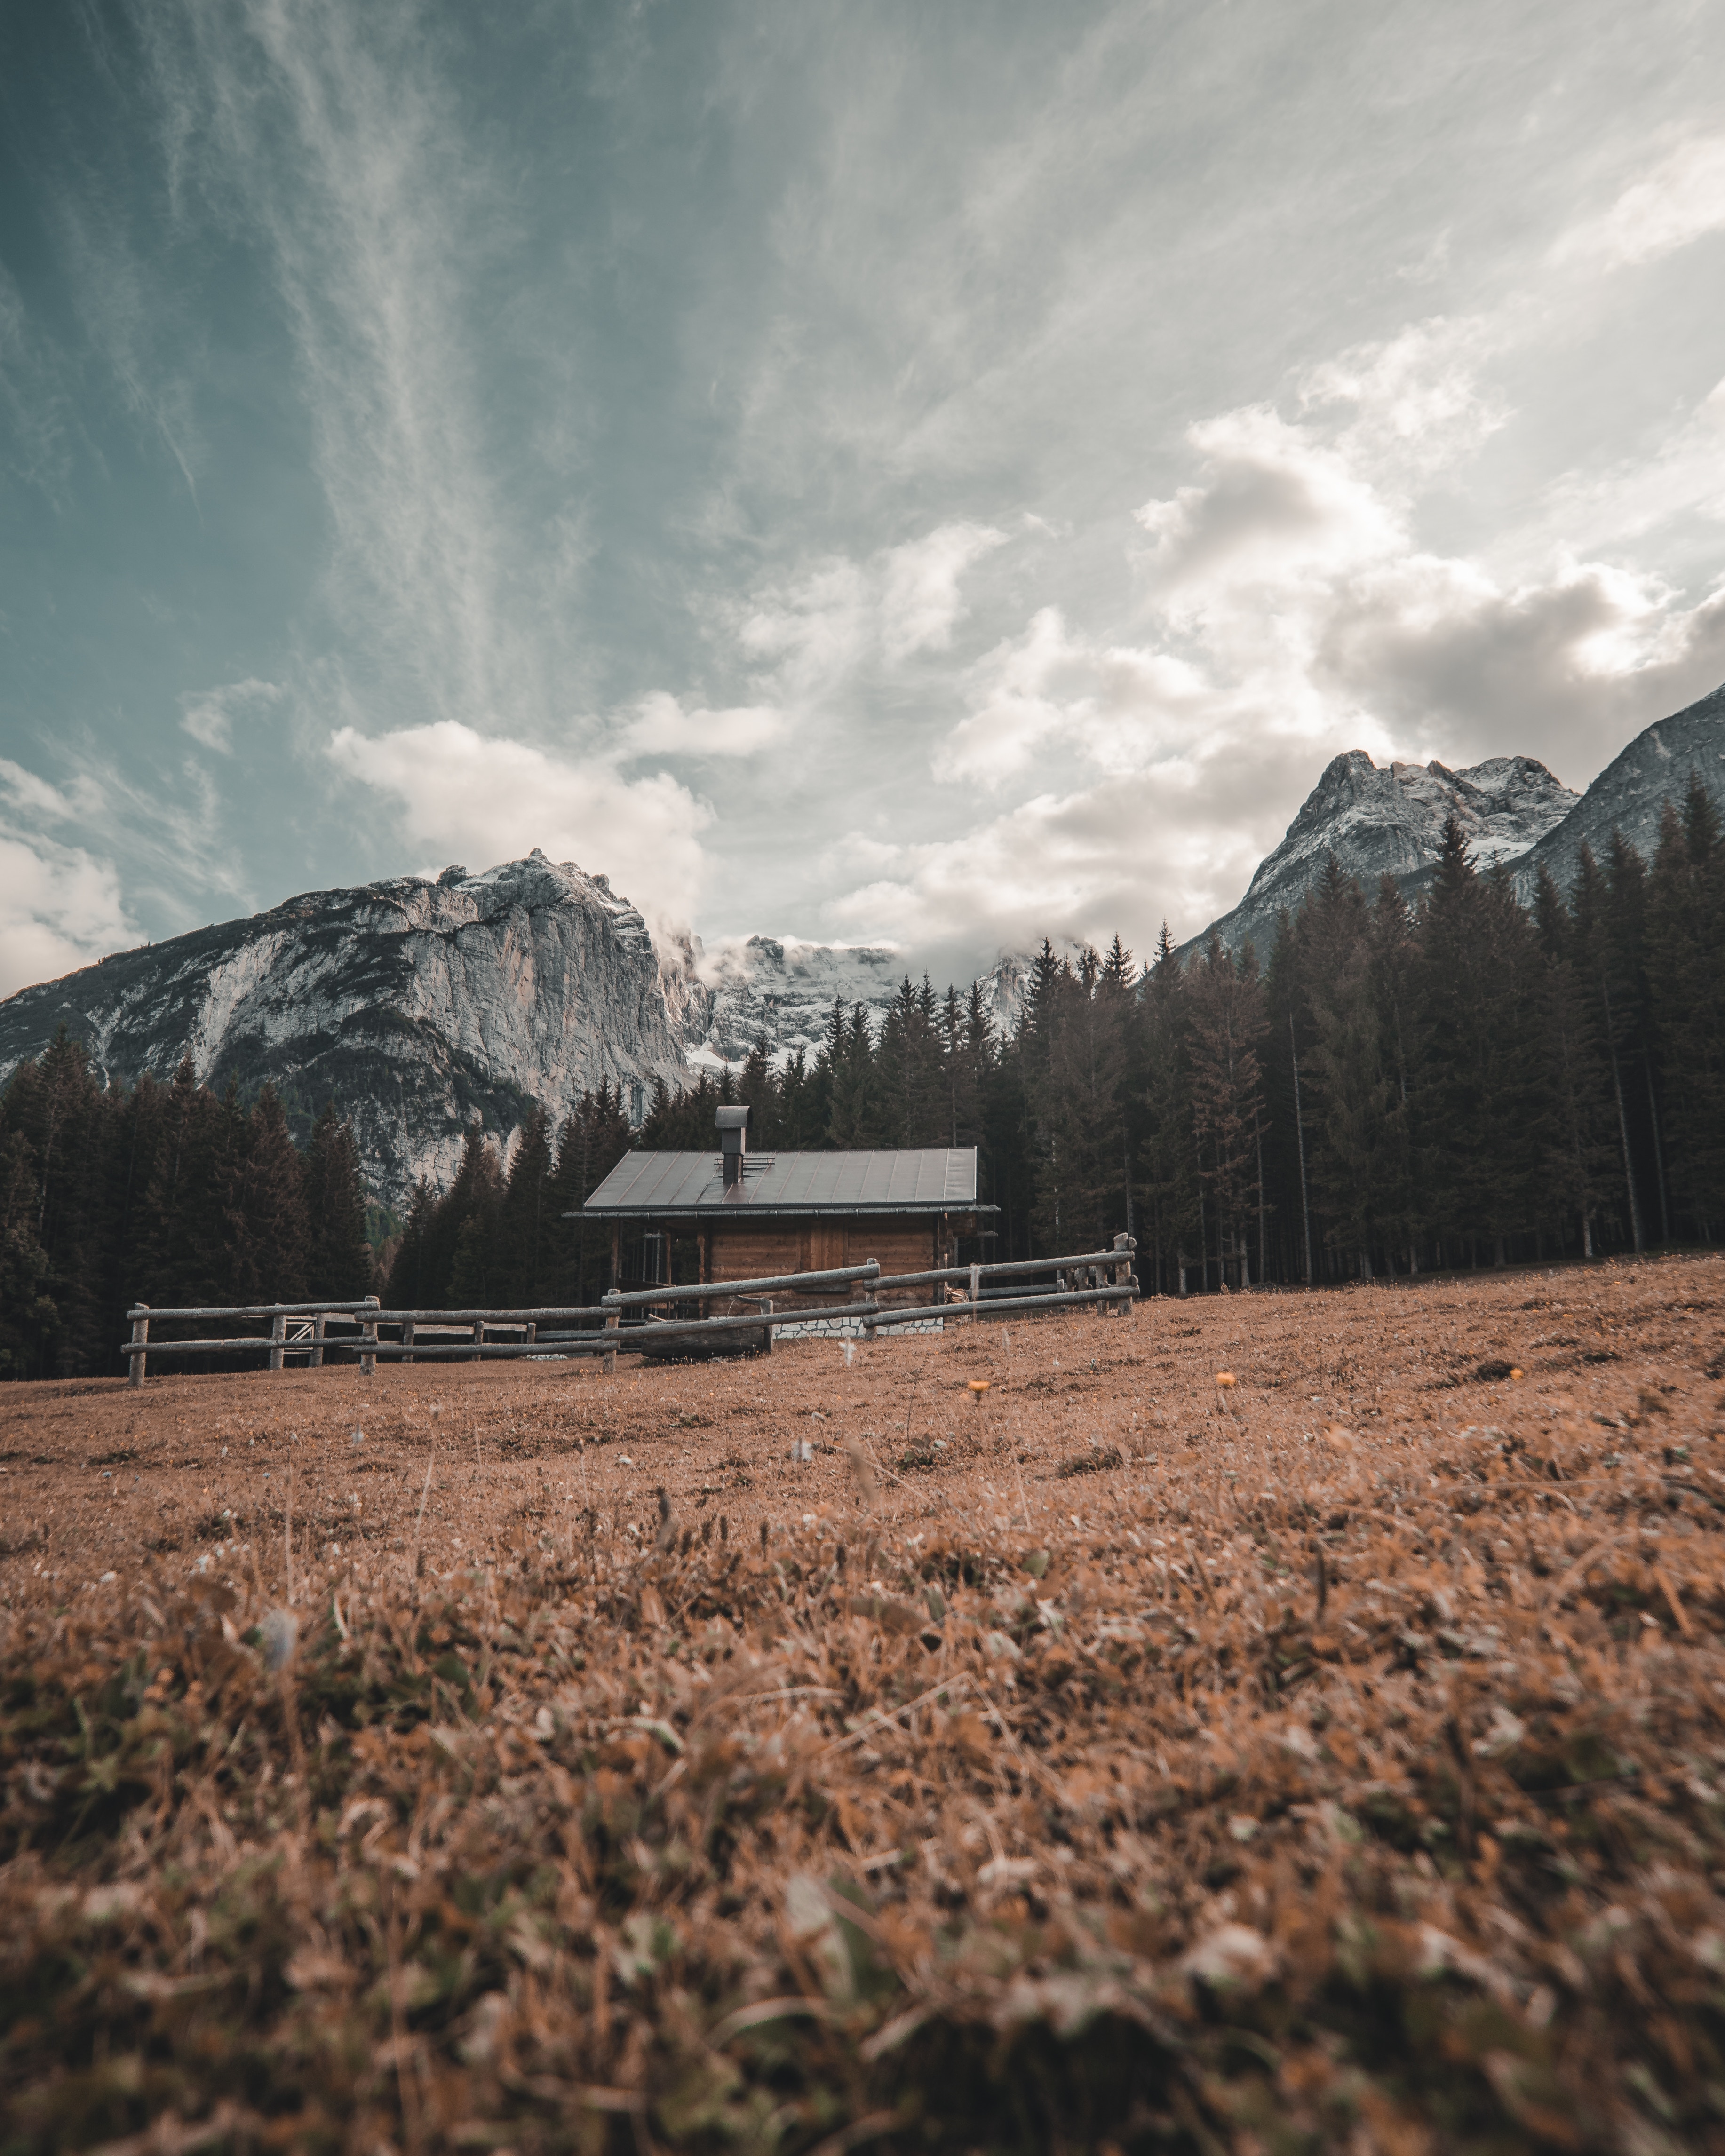 italy, mountains, nature, privacy, seclusion, small house, lodge, dolomites